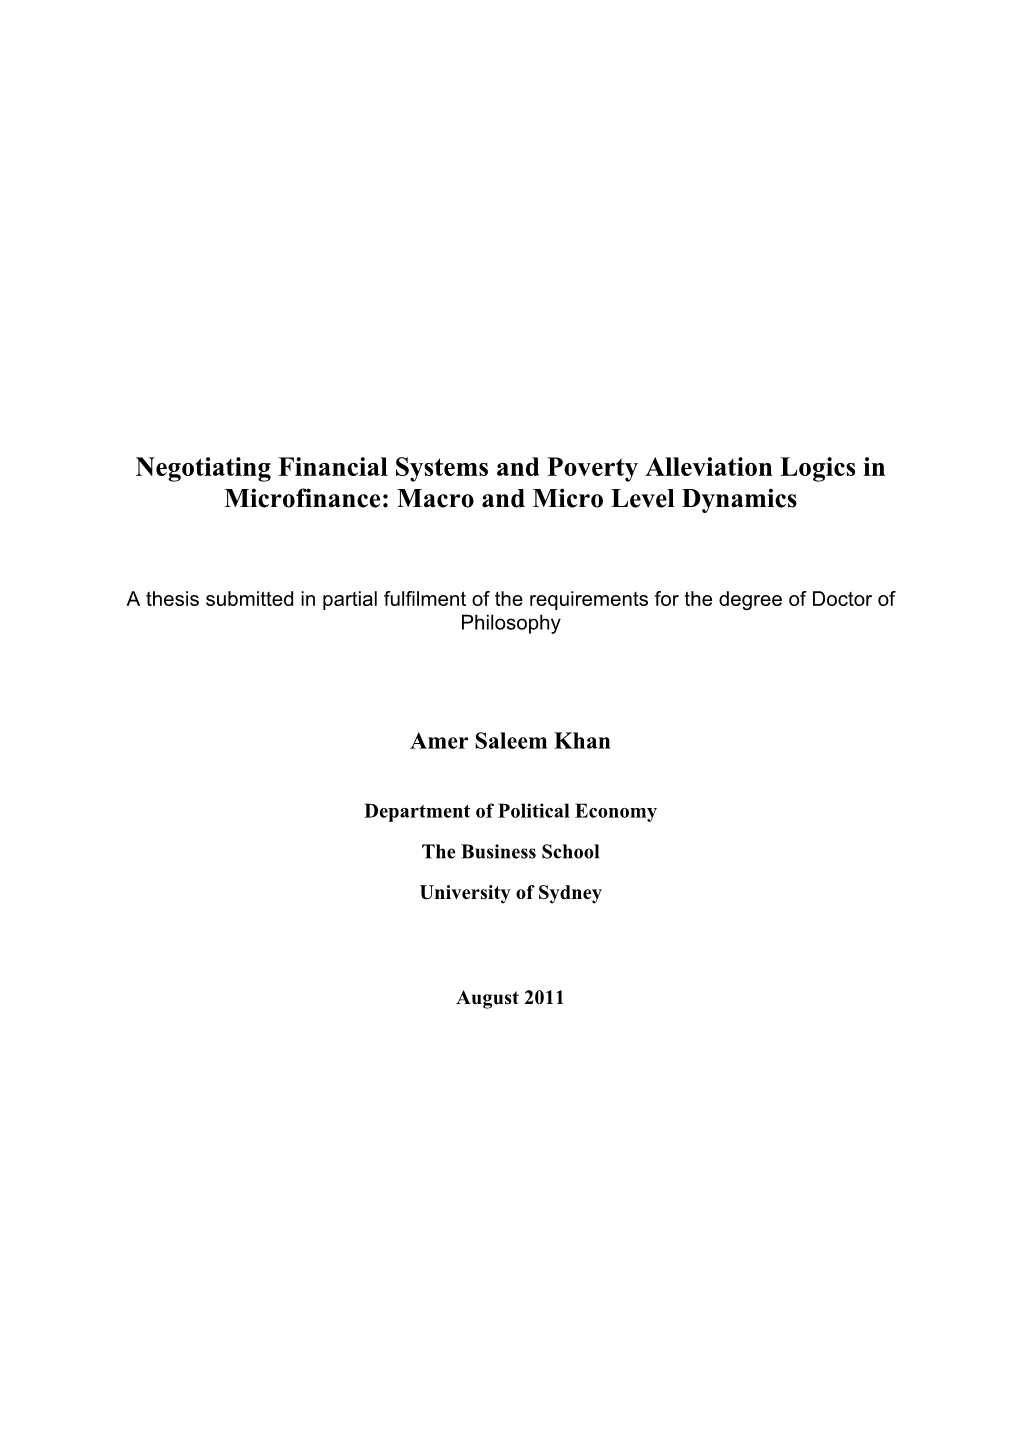 Negotiating Financial Systems and Poverty Alleviation Logics in Microfinance: Macro and Micro Level Dynamics